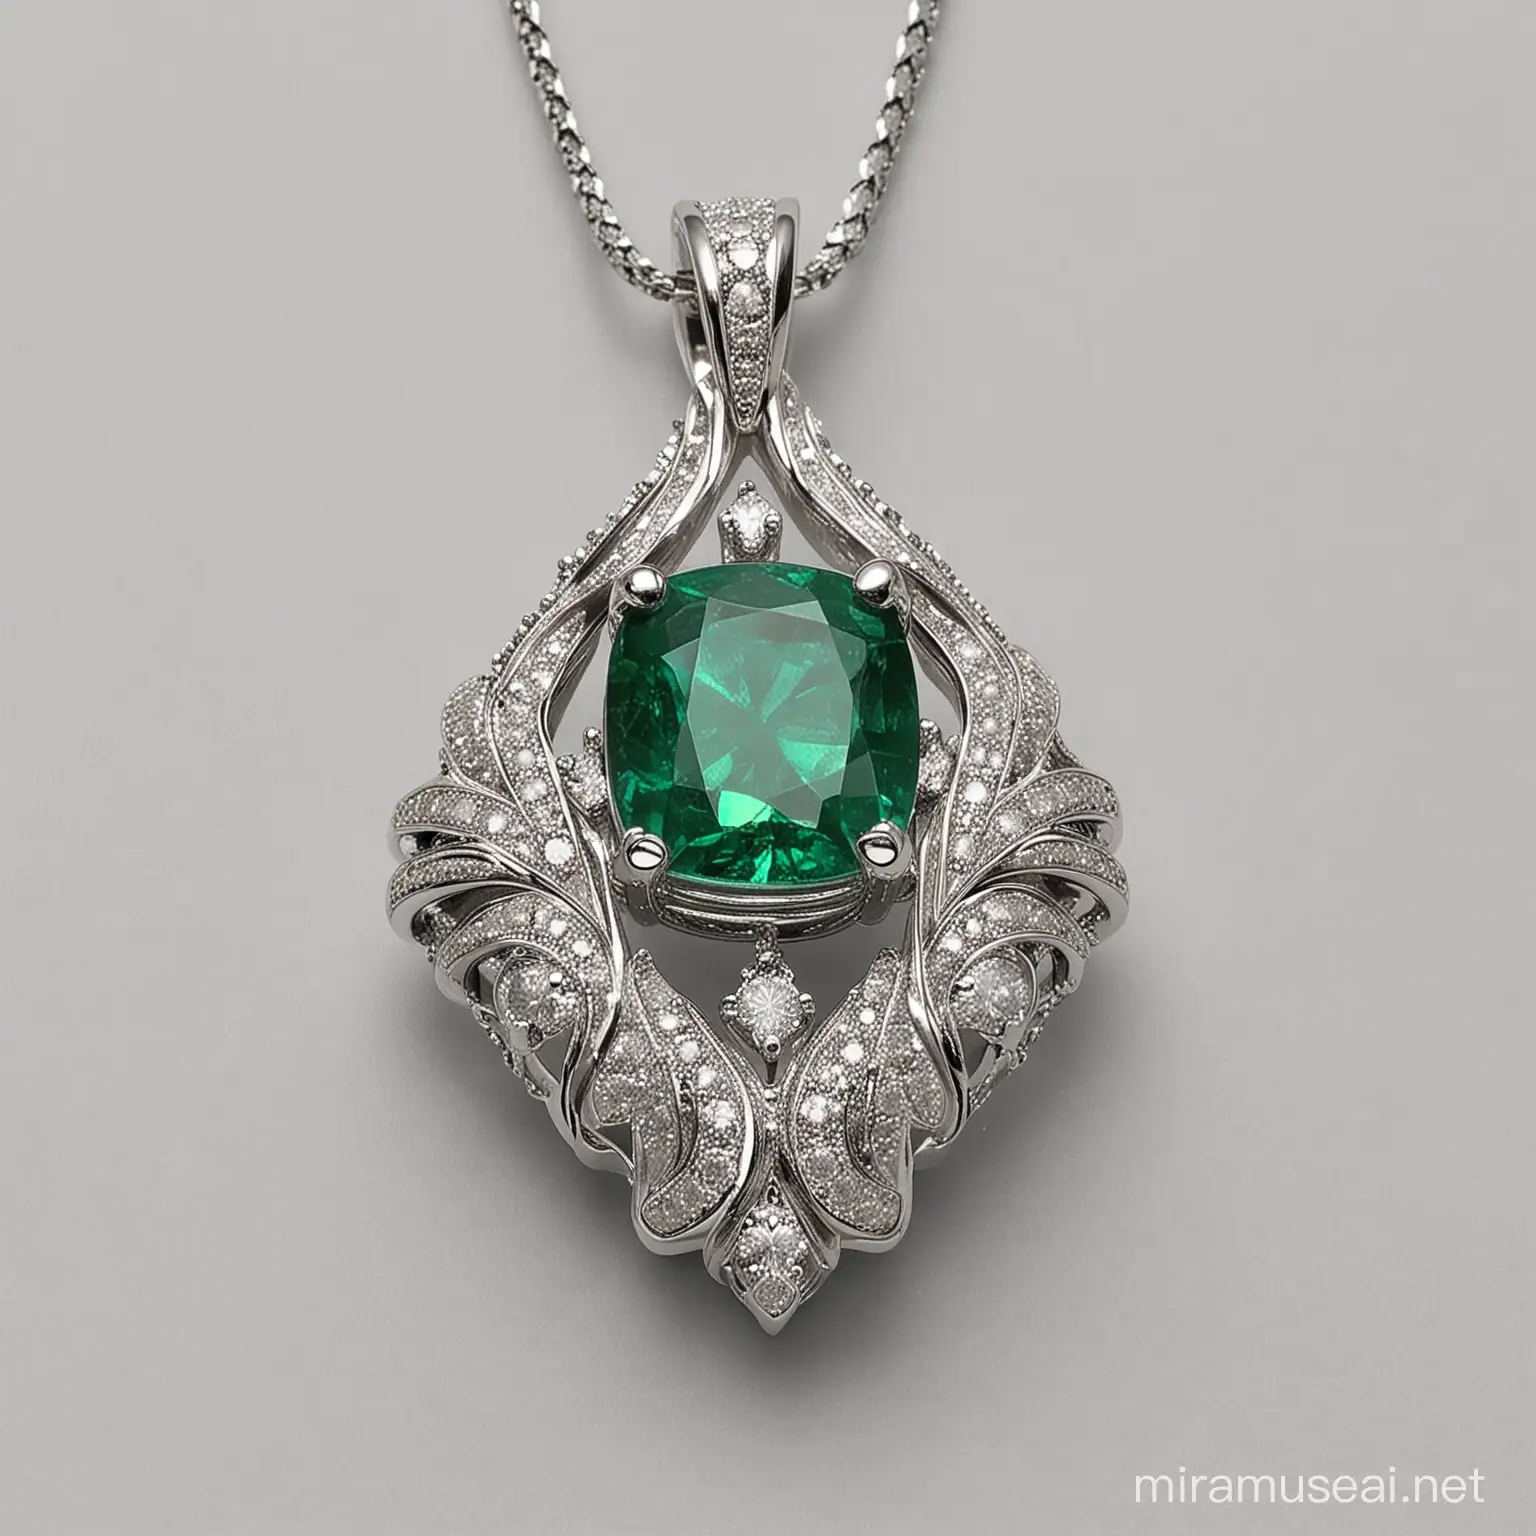 Modern Silver Pendant with CushionCut Emerald and Diamond Accents